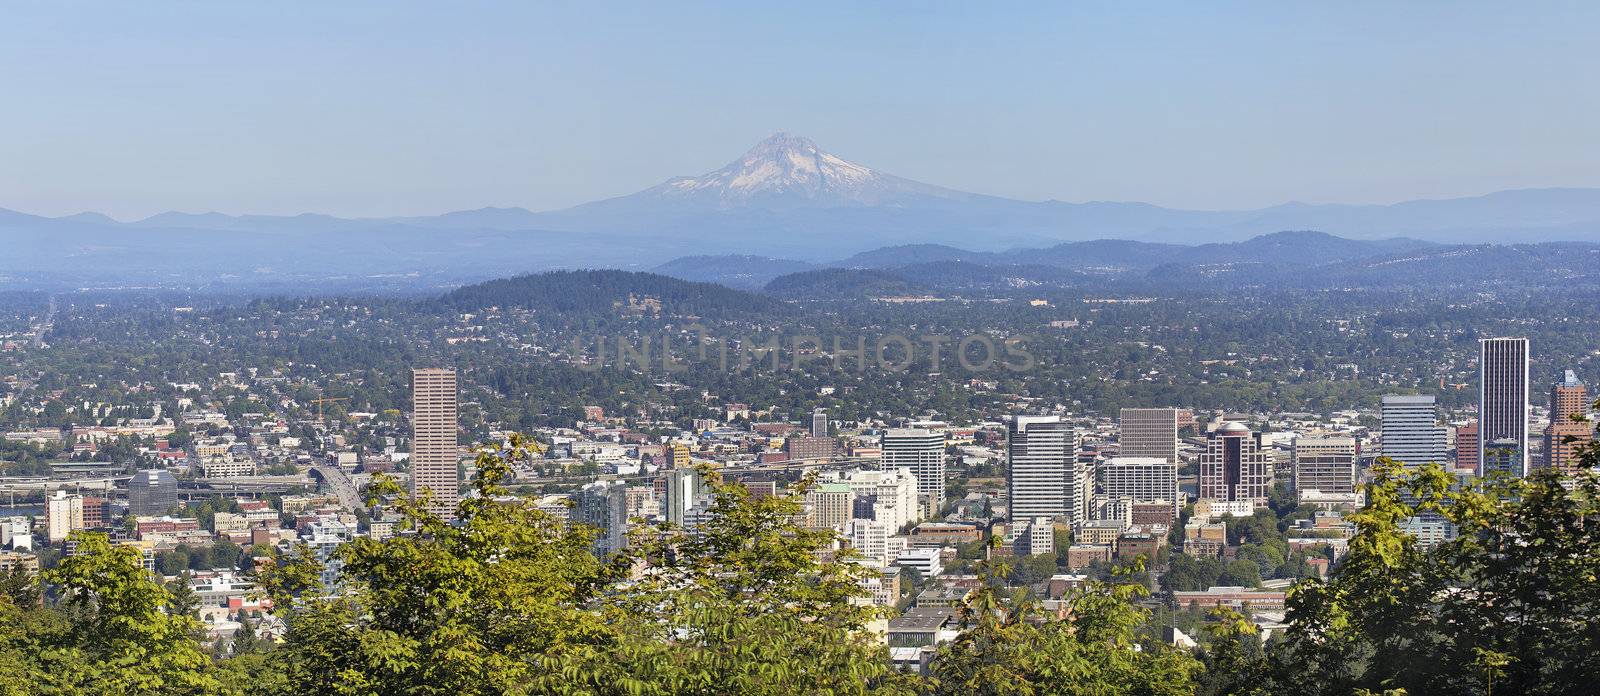 Portland Downtown City Landscape with Mount Hood Panorama by jpldesigns